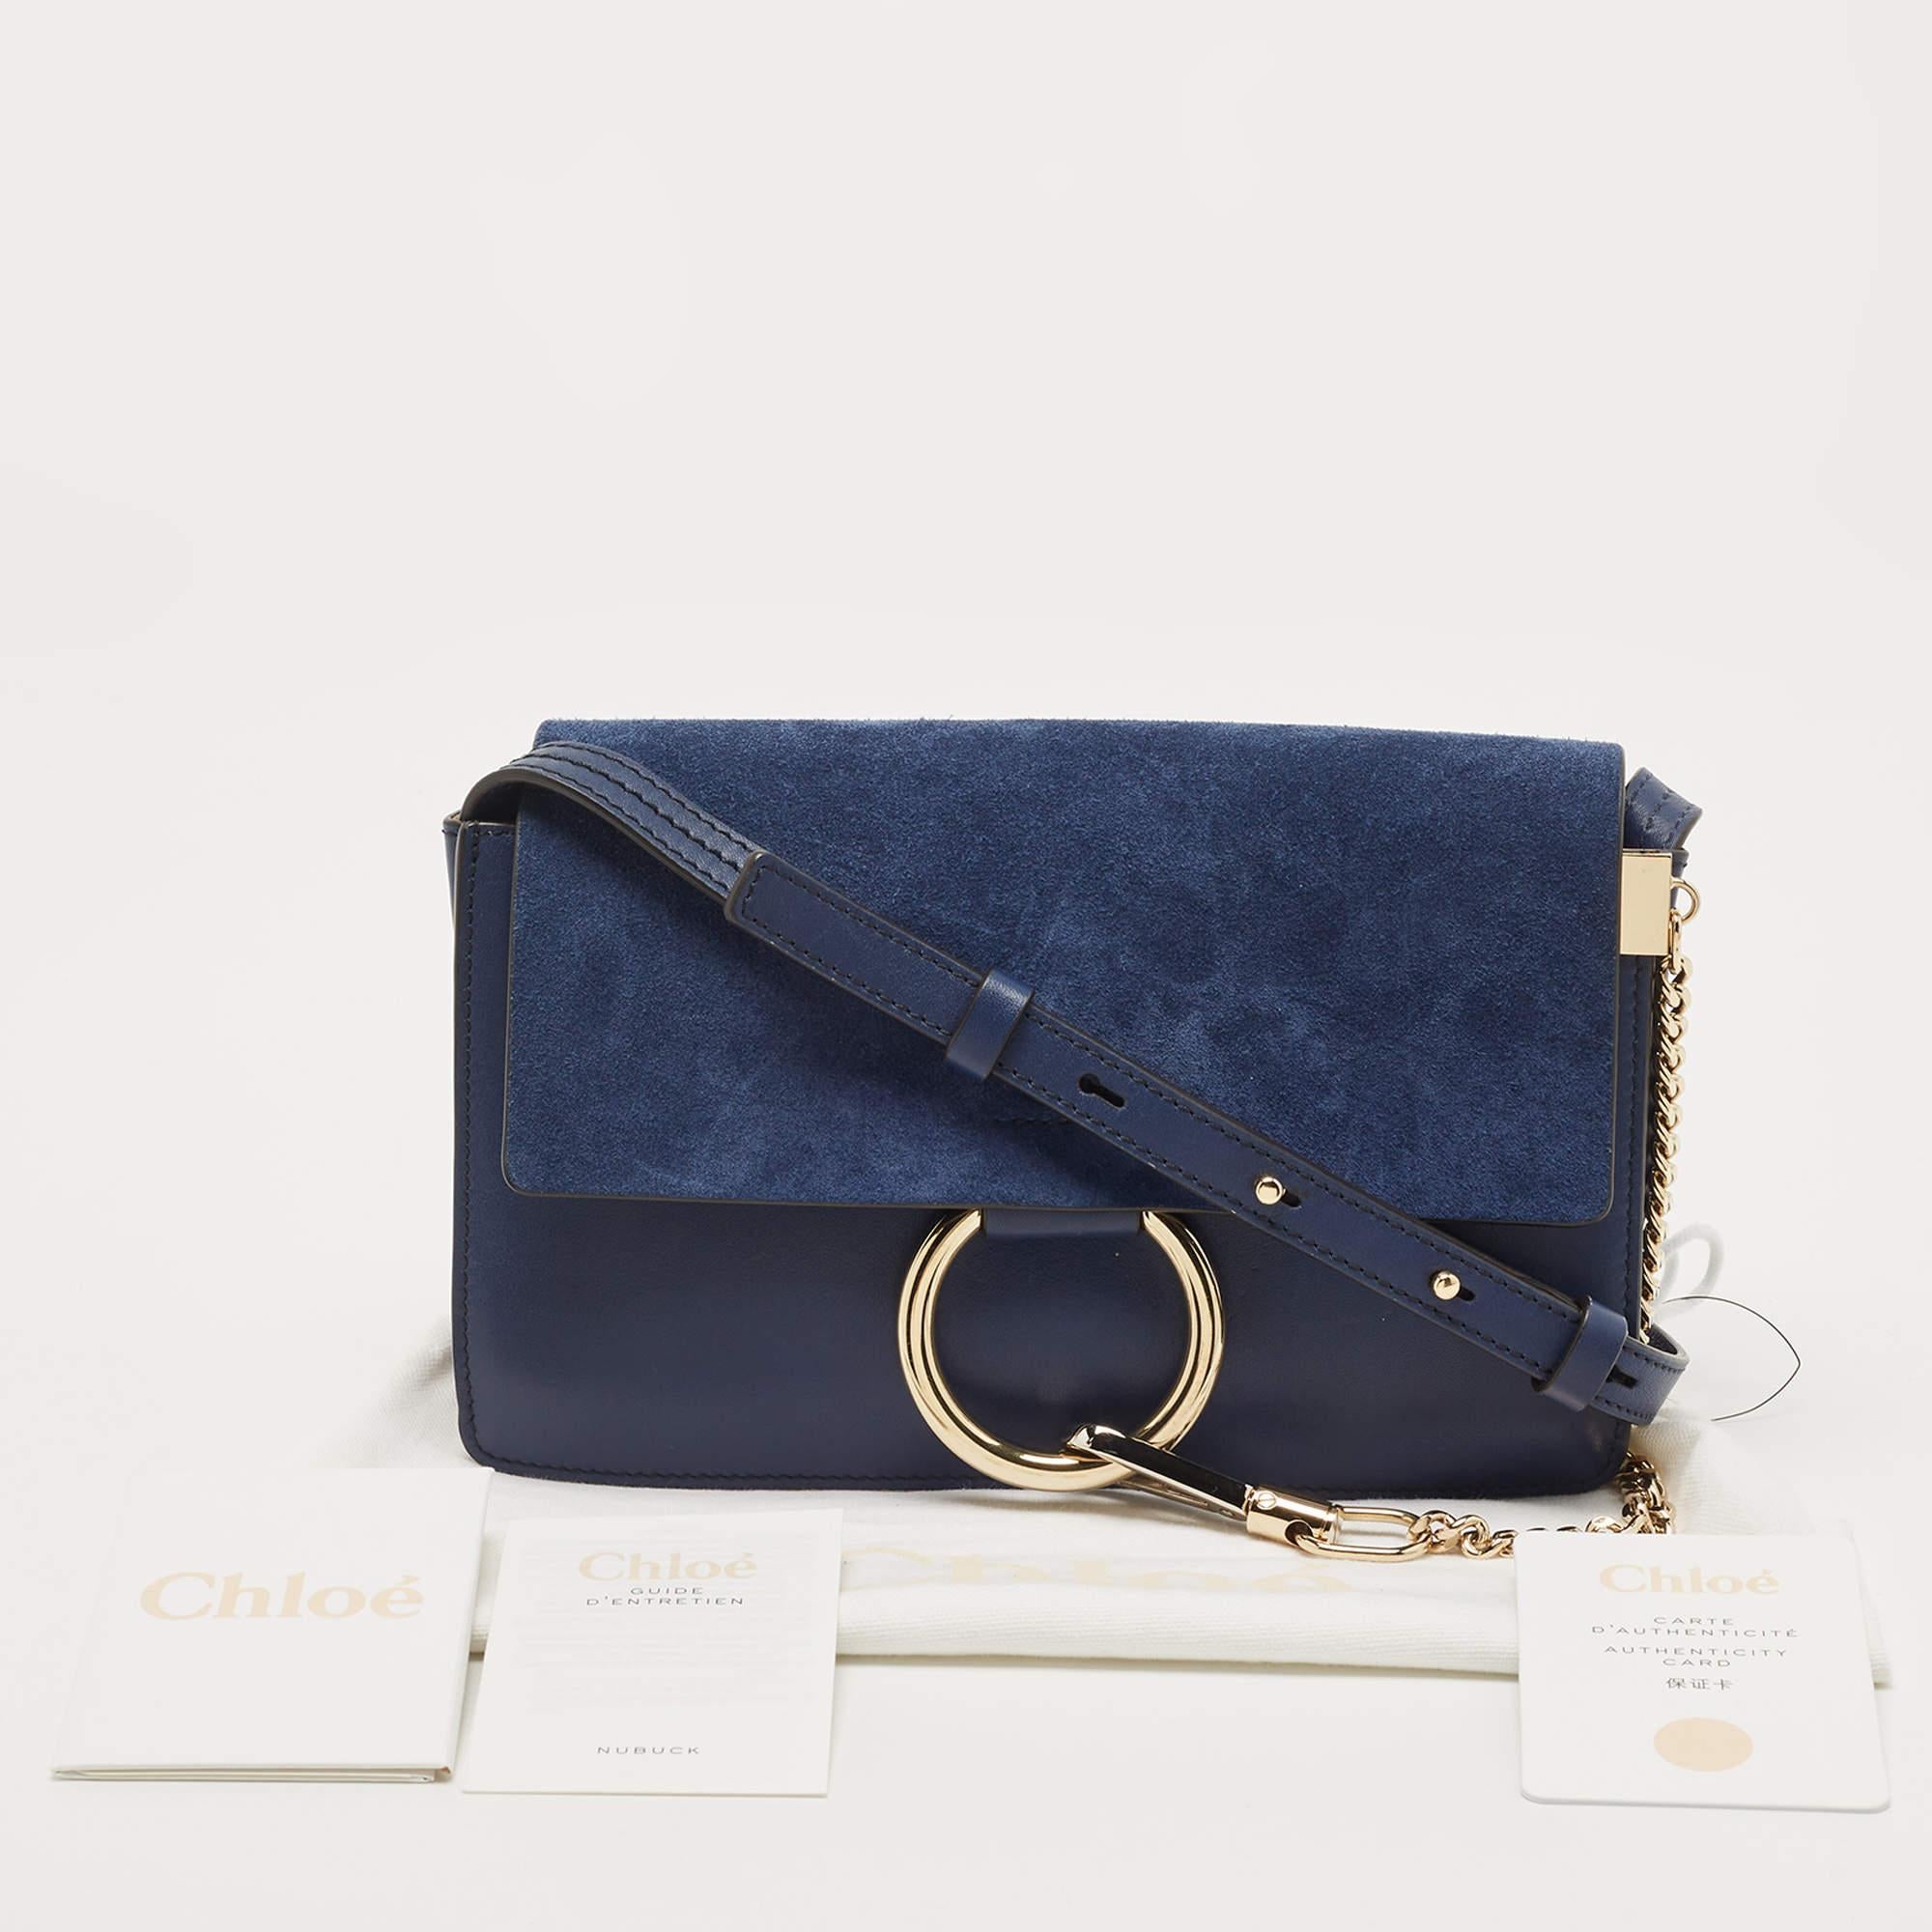 Chloe Navy Blue Leather and Suede Small Faye Shoulder Bag 10